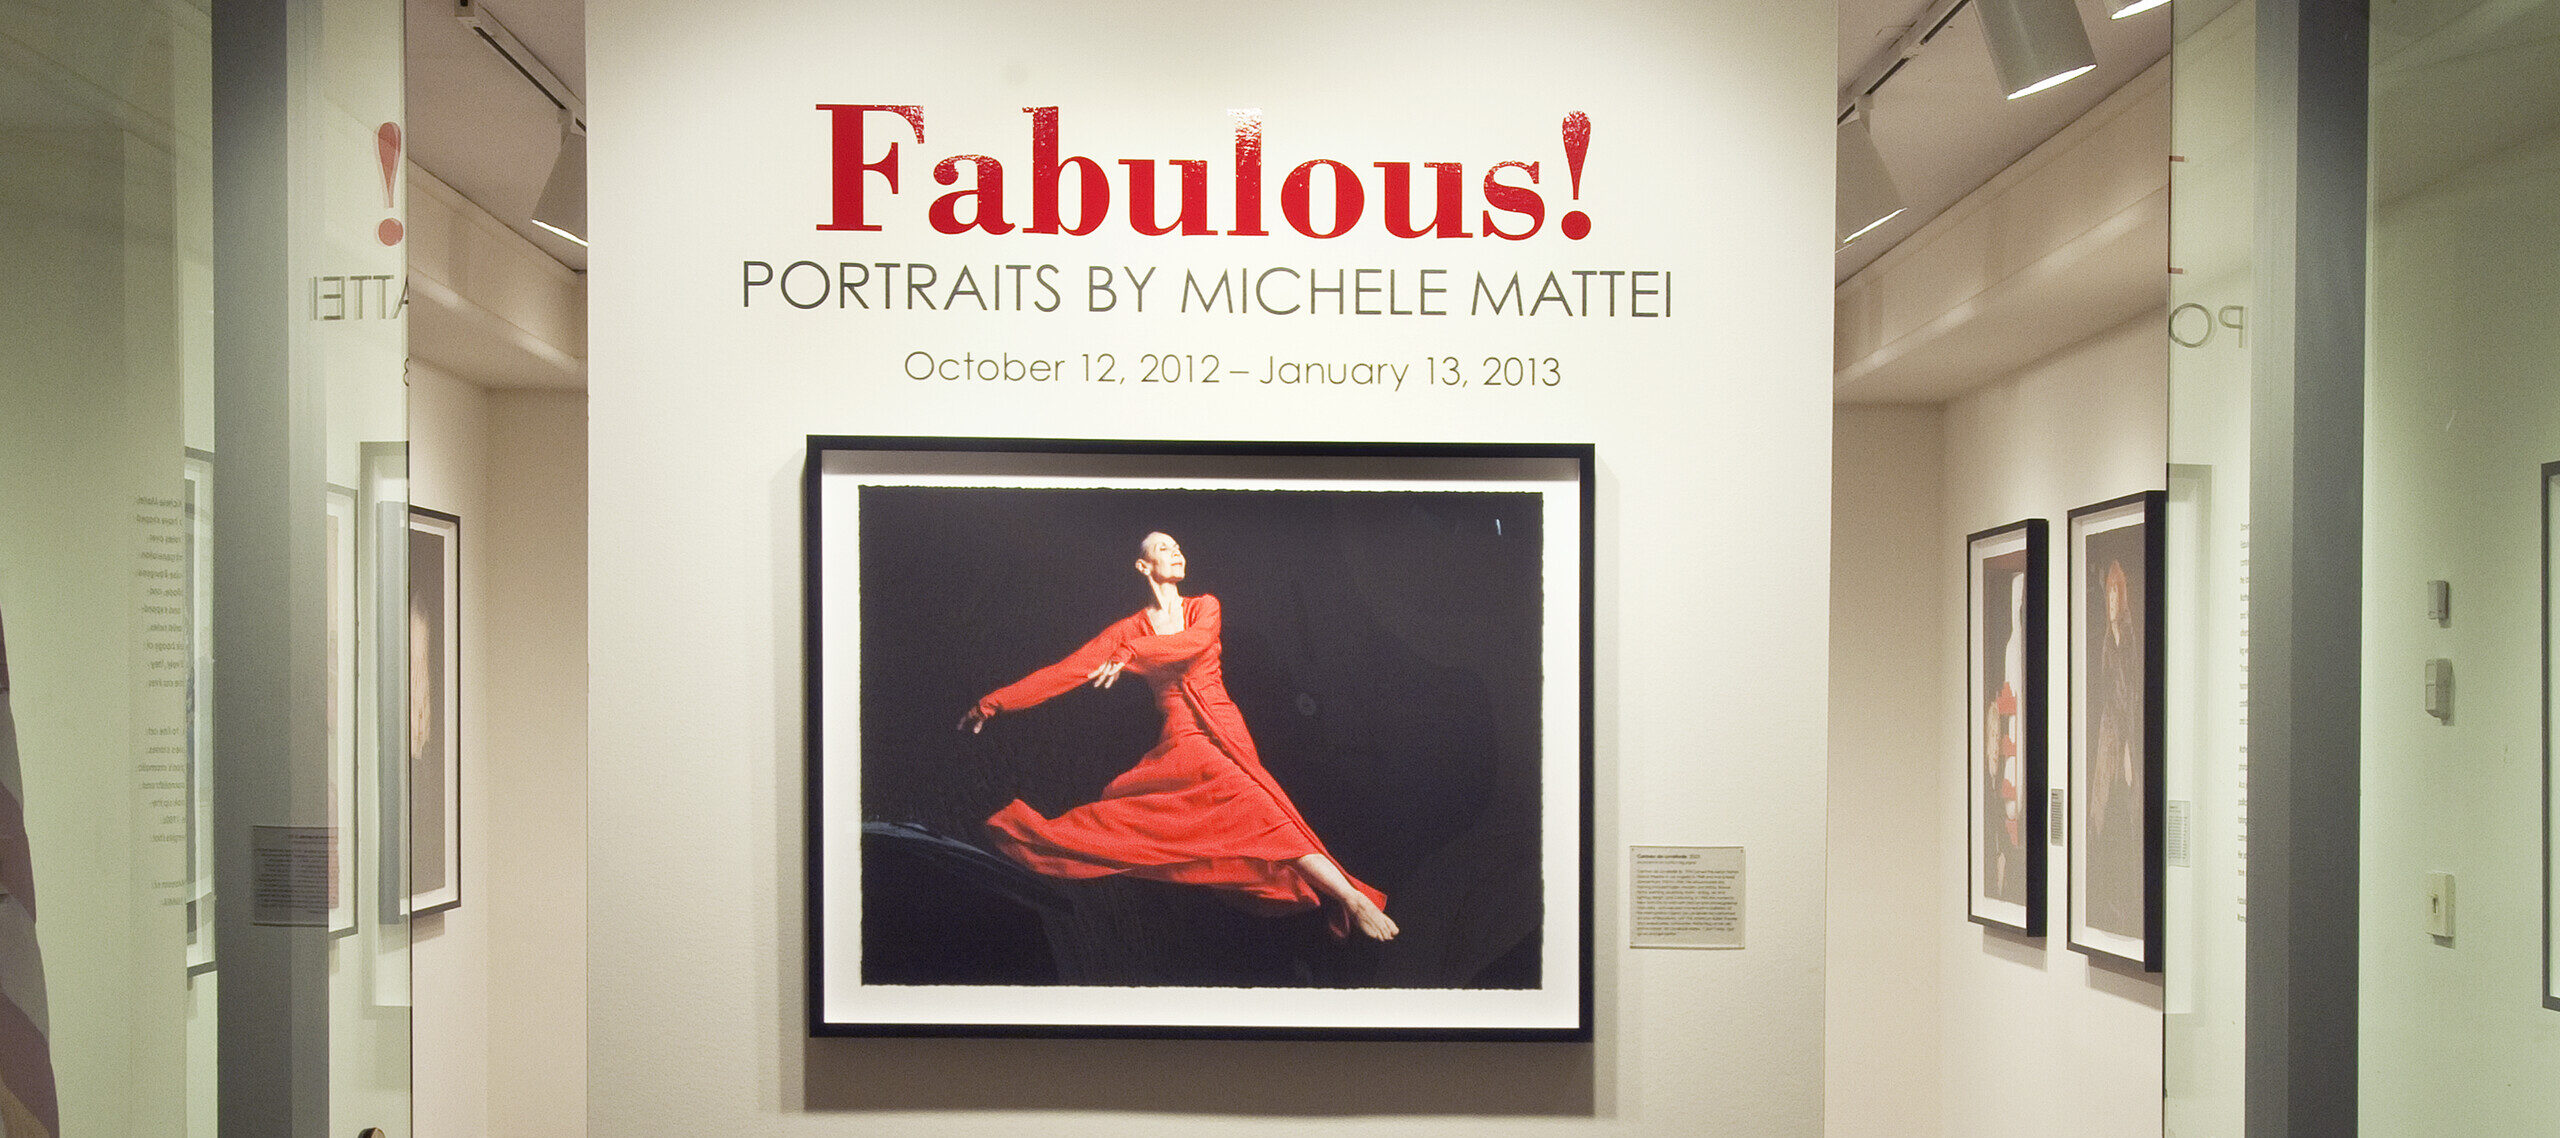 View of a gallery space. On a white wall, a photograph of a woman dancing, wearing a red dress, is hanging below the text 